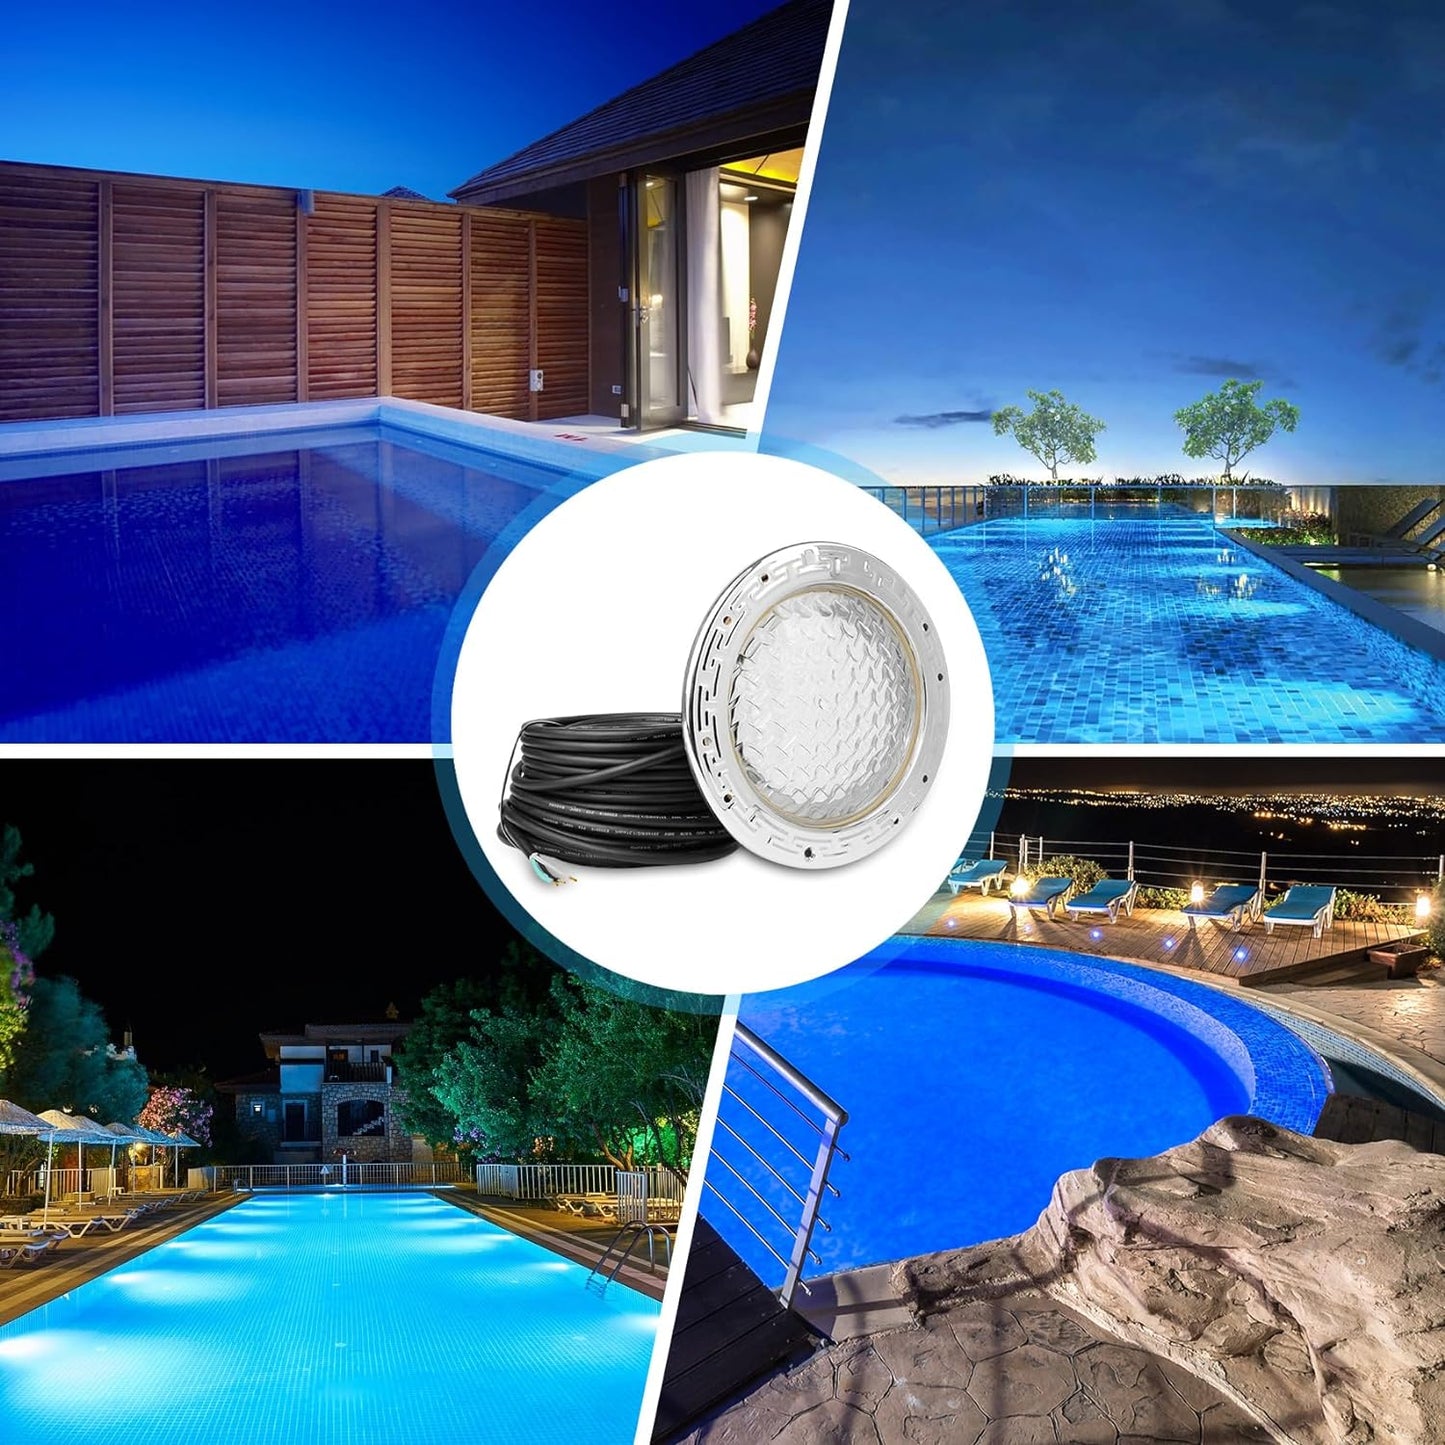 AC12V RGBW Pool Lights for Inground Pool, 50FT LED Pool Lights for Inground Pool, Wall Mount Pool Lights for Inground Pools Waterproof, Full Instructions and Remote Control (50FT)